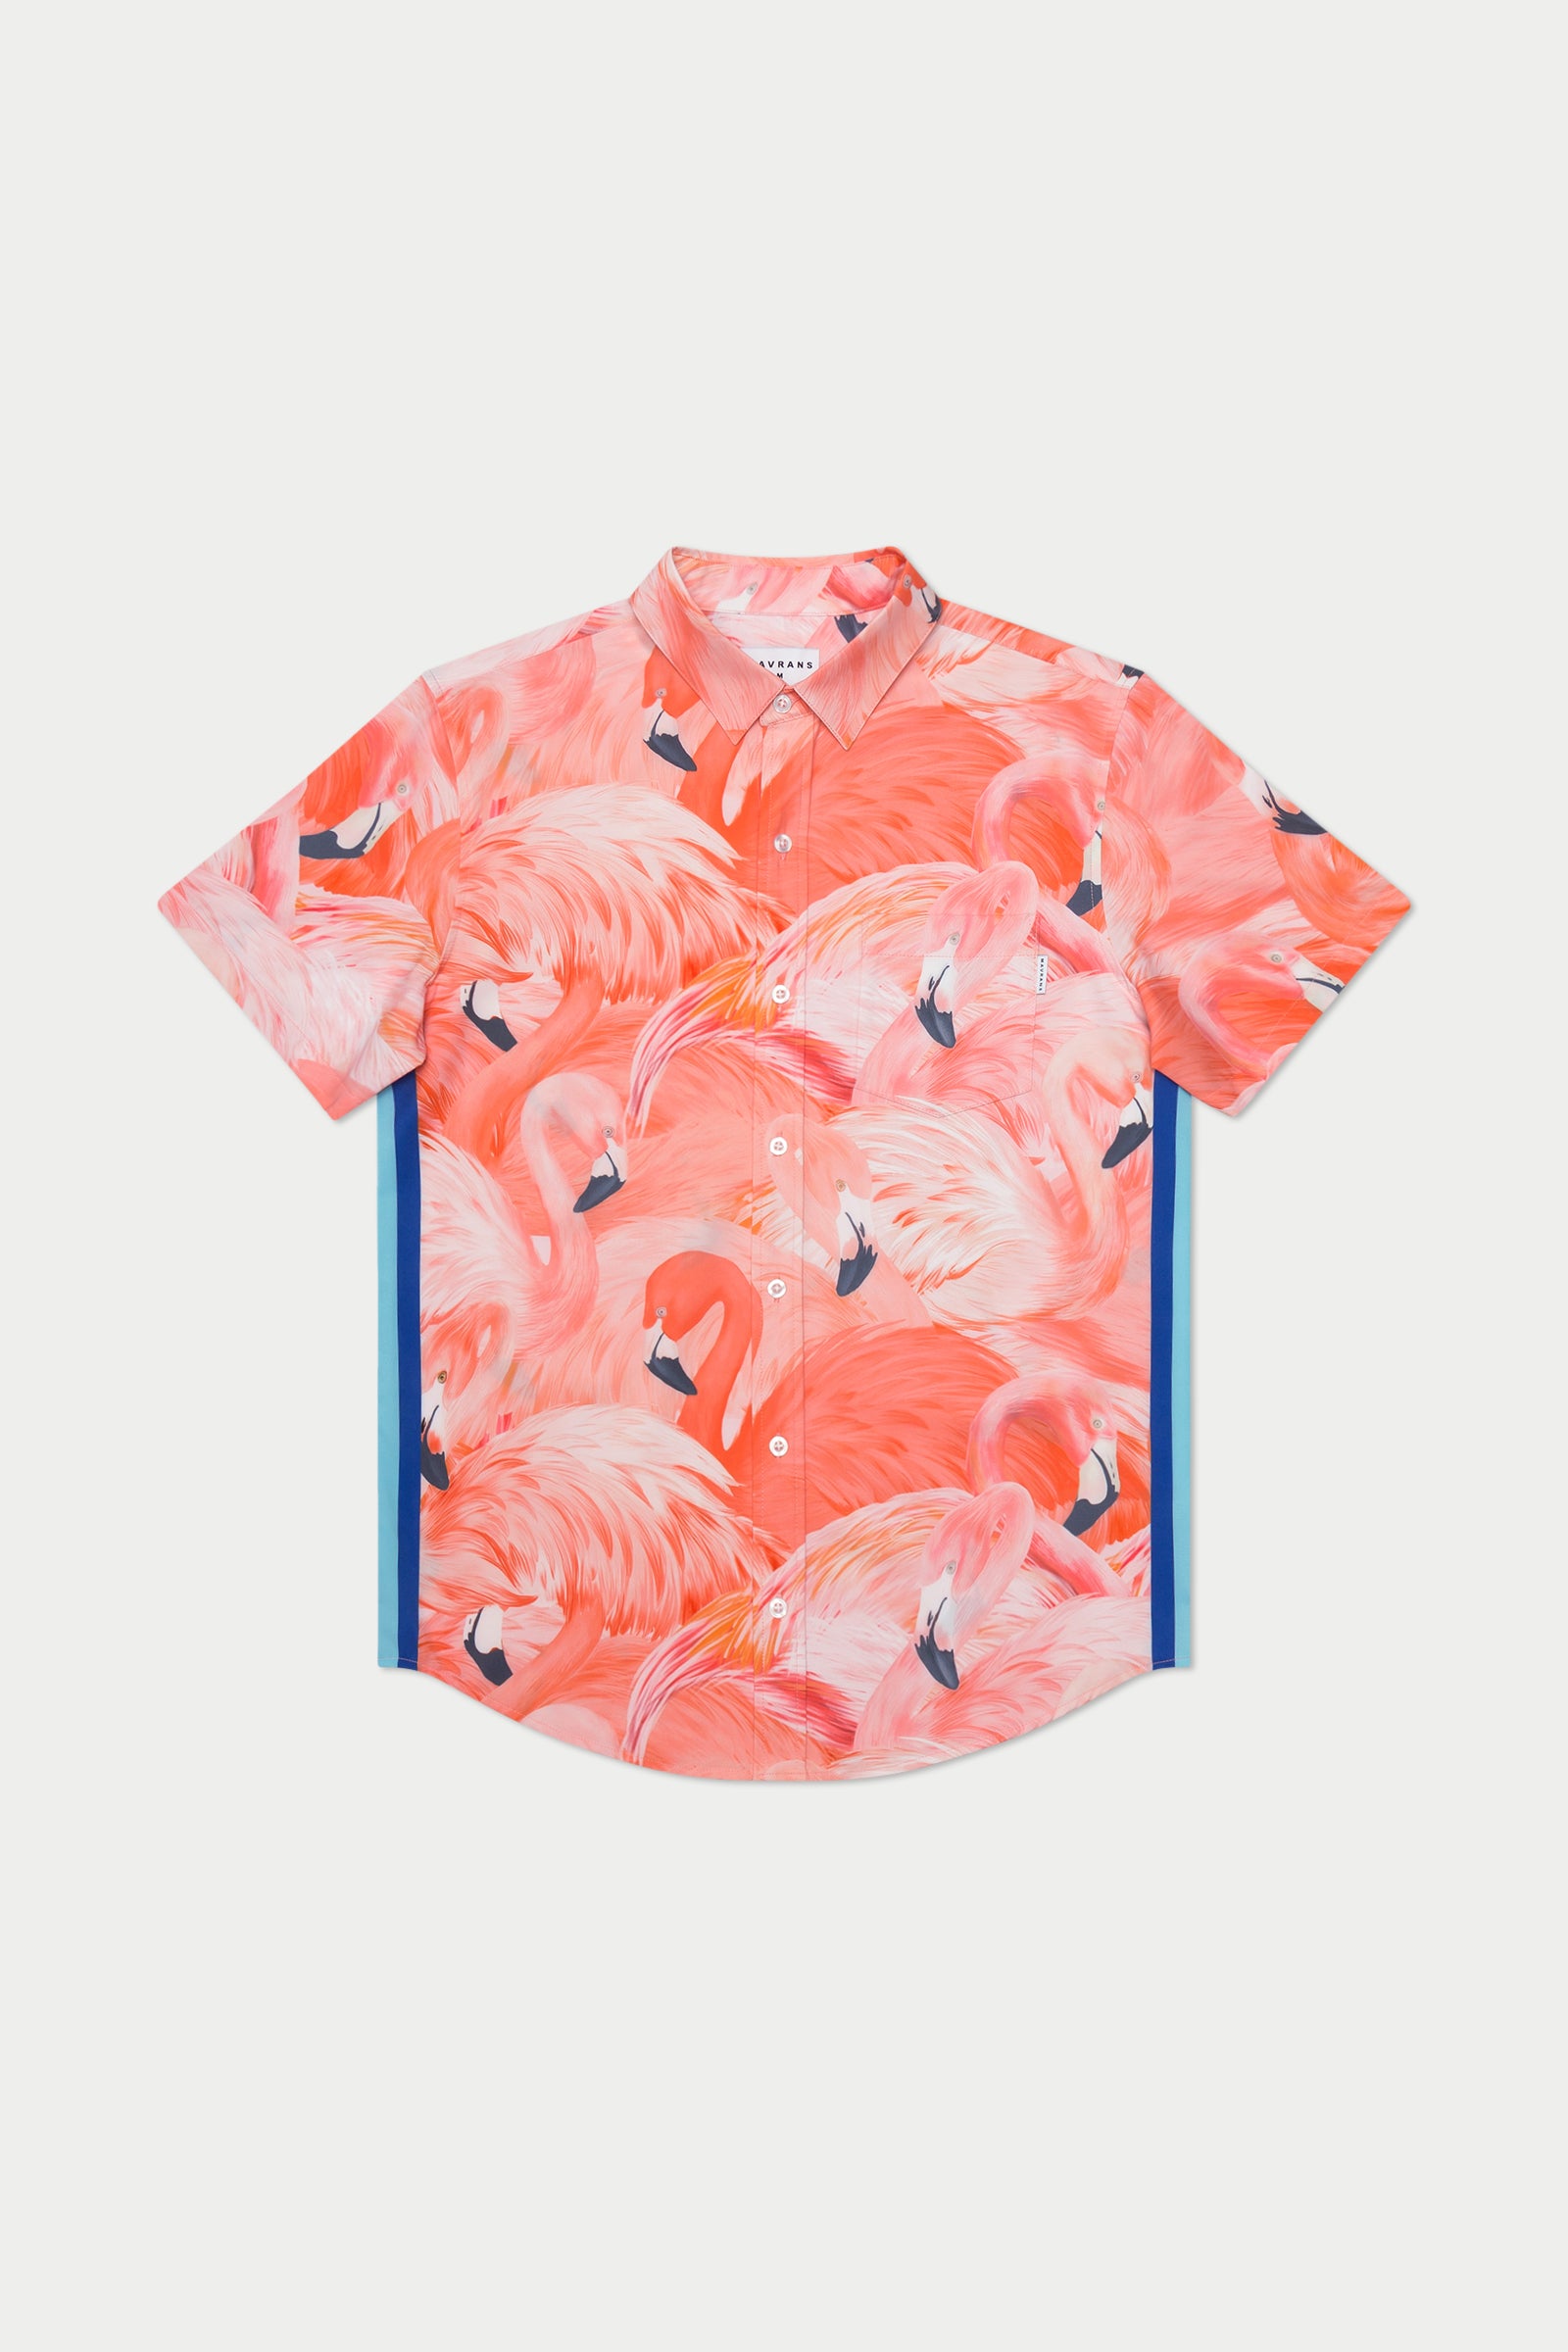 Flamingo Motel  Essential T-Shirt for Sale by GreatTomorrow